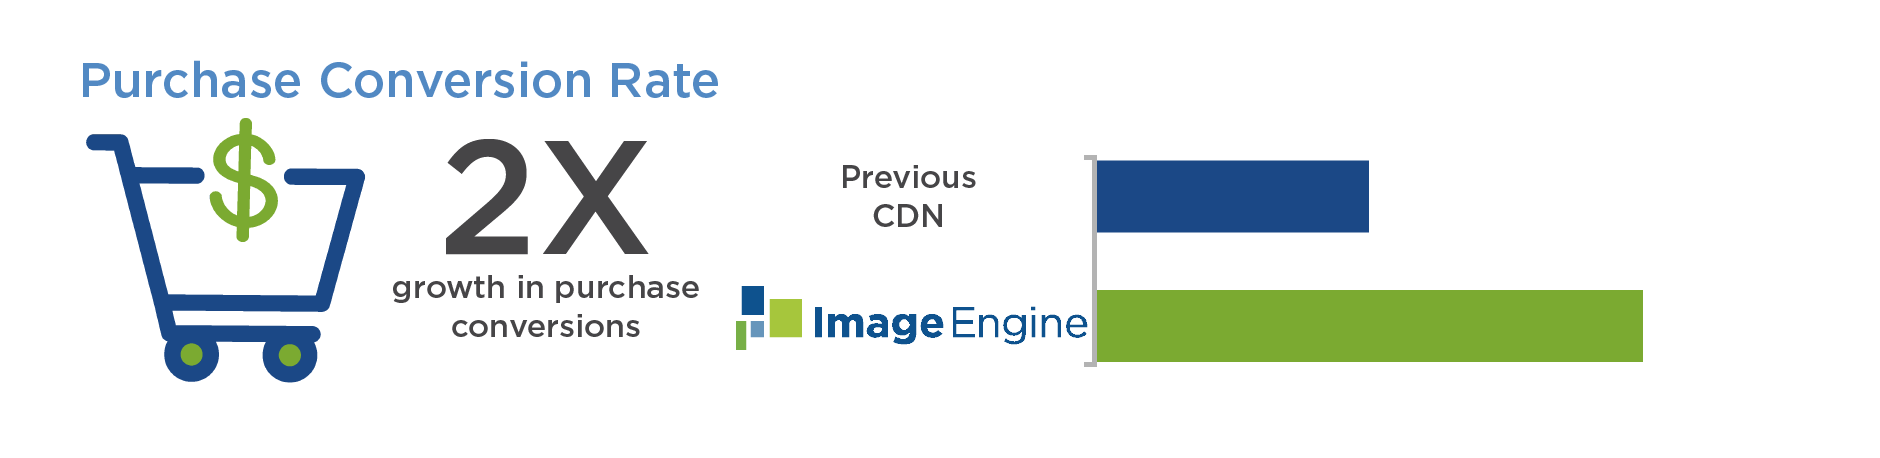 Furnspace Increase in Purchase Conversion Rate from ImageEngine Image CDN